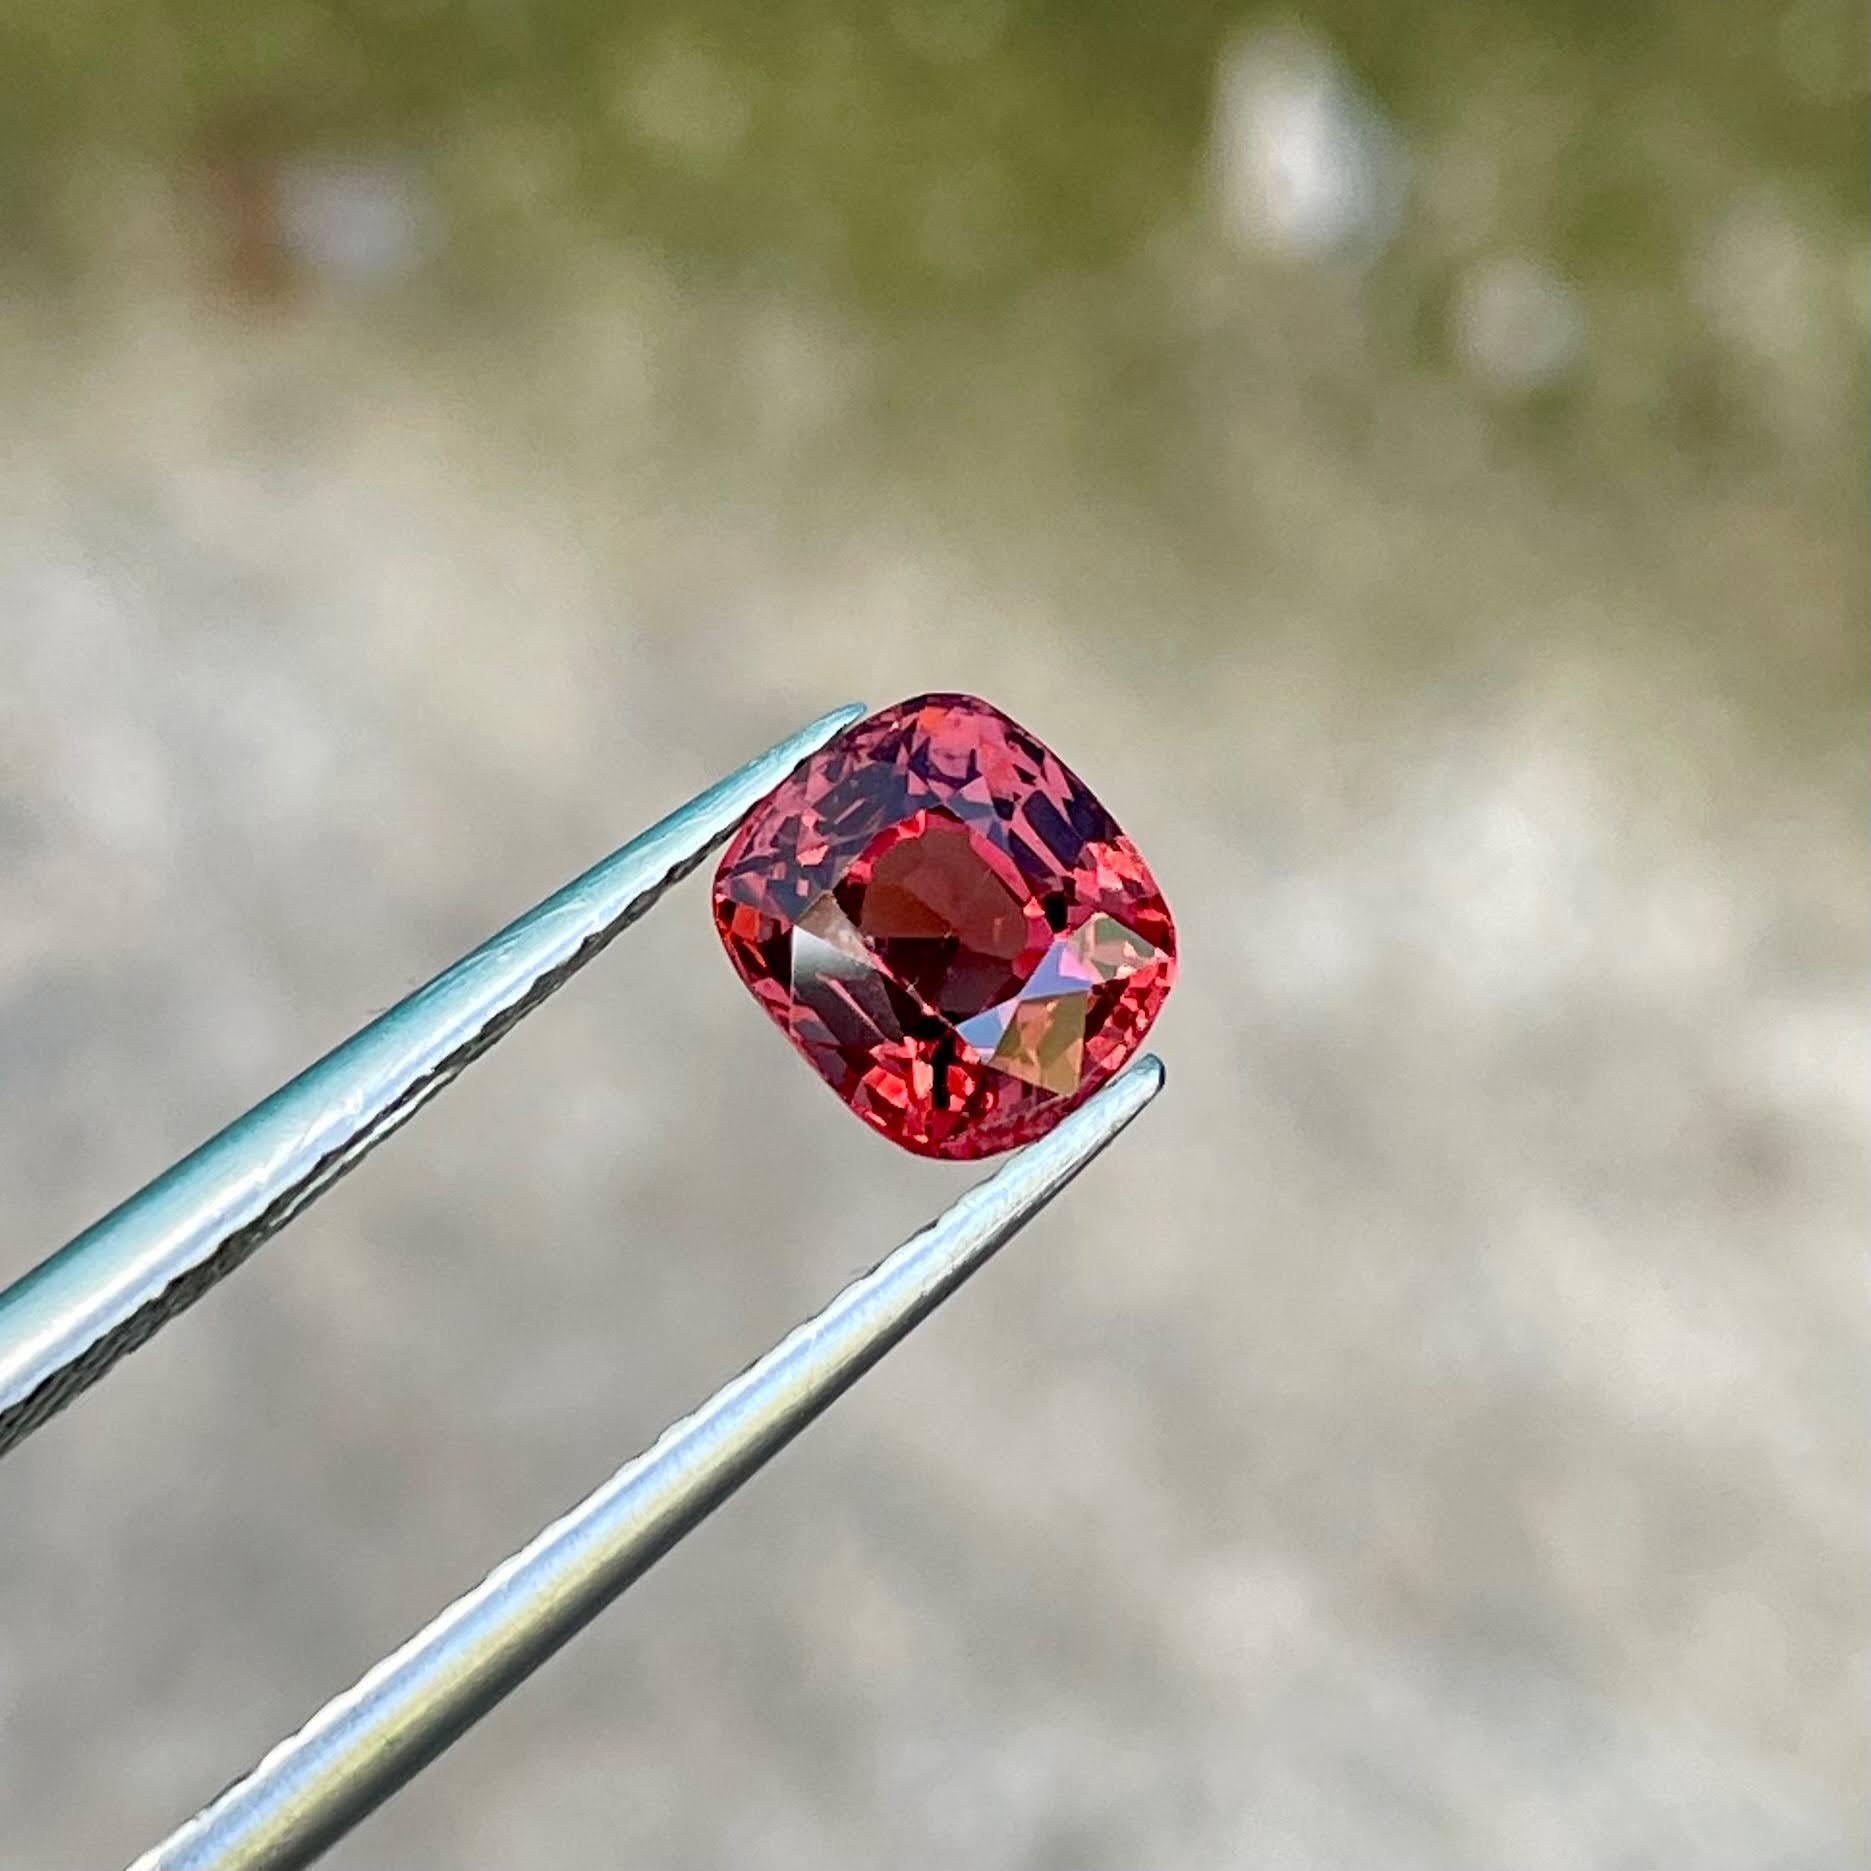 Weight 1.15 carats 
Dimensions 6.12x5.45x4.05 mm
Treatment none 
Origin Burma 
Clarity VVS
Cut Cushion 




Discover the captivating allure of this exquisite 1.15 carat Orangy Red Burmese Spinel Stone. With its mesmerizing hue reminiscent of a fiery